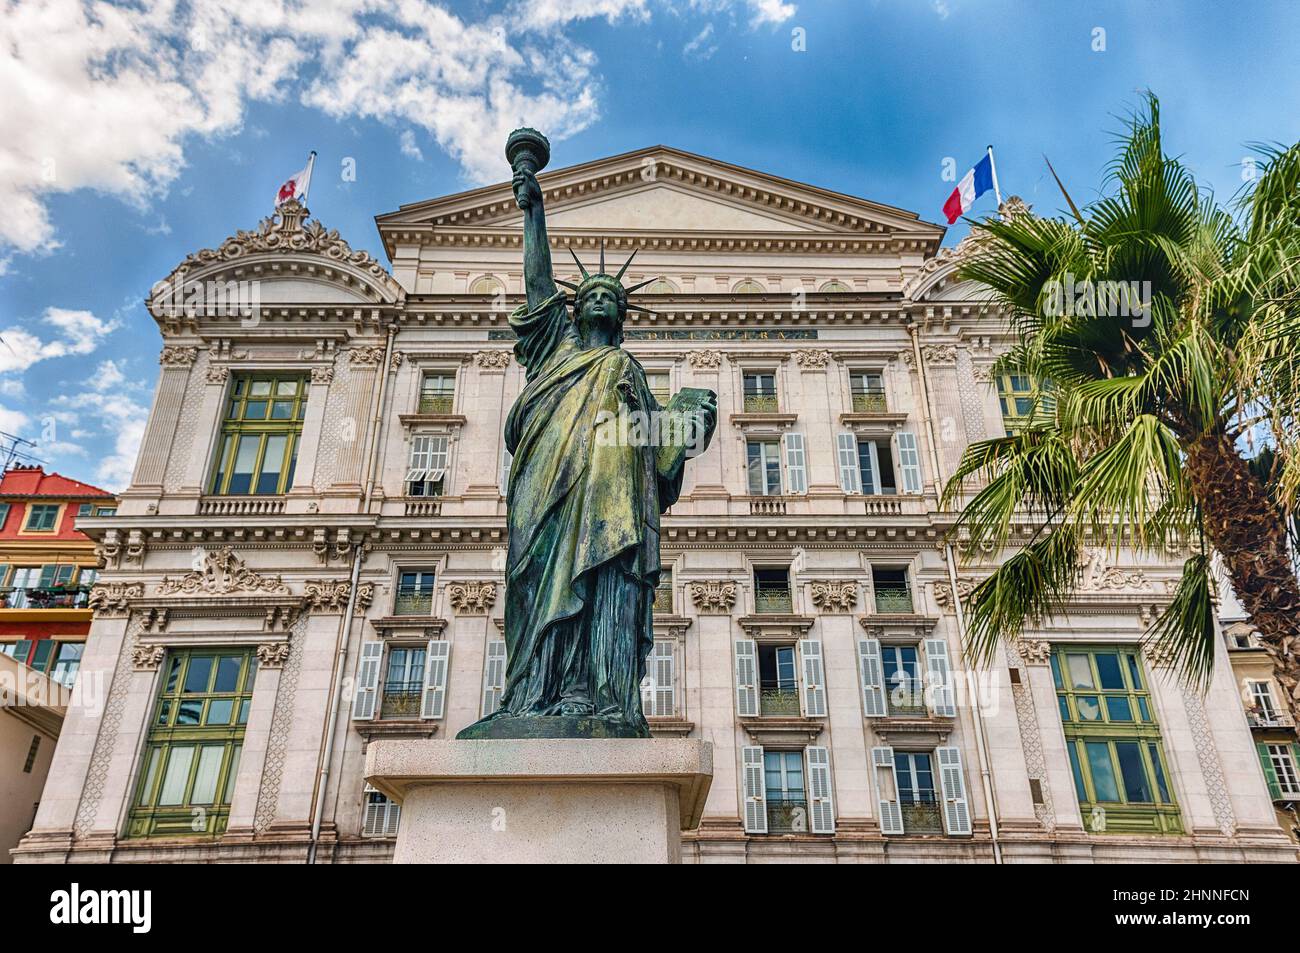 Southern facade of the Opera House, Nice, Cote d'Azur, France Stock Photo